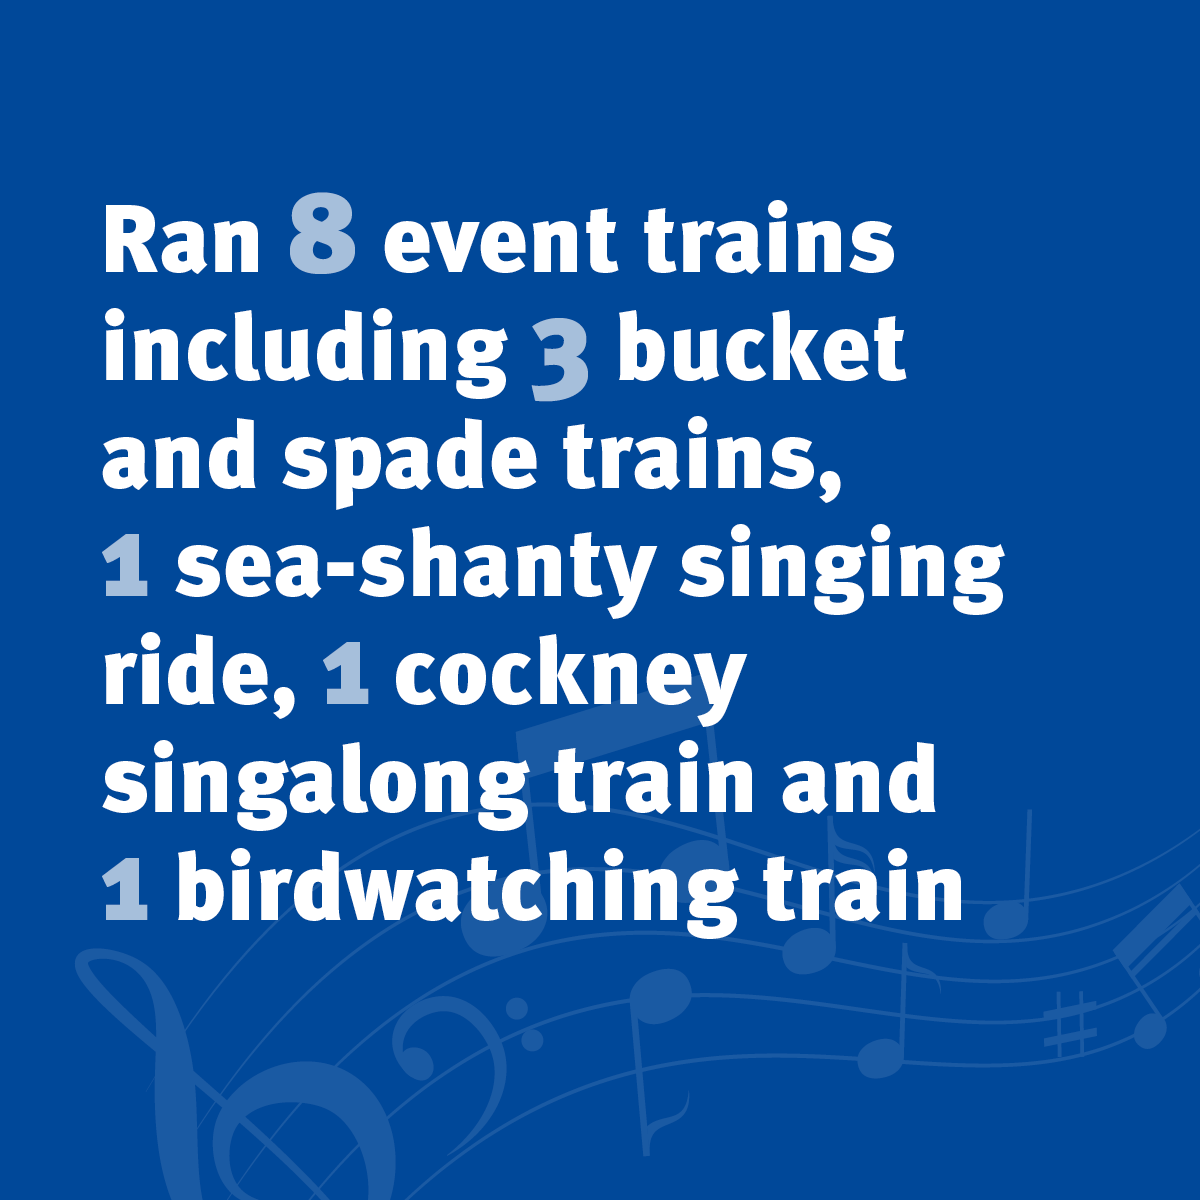 Ram 8 event trains including 3 bucket and space trains, 1 sea-shanty singing ride, 1 cockney singalong train and 1 birdwatching train